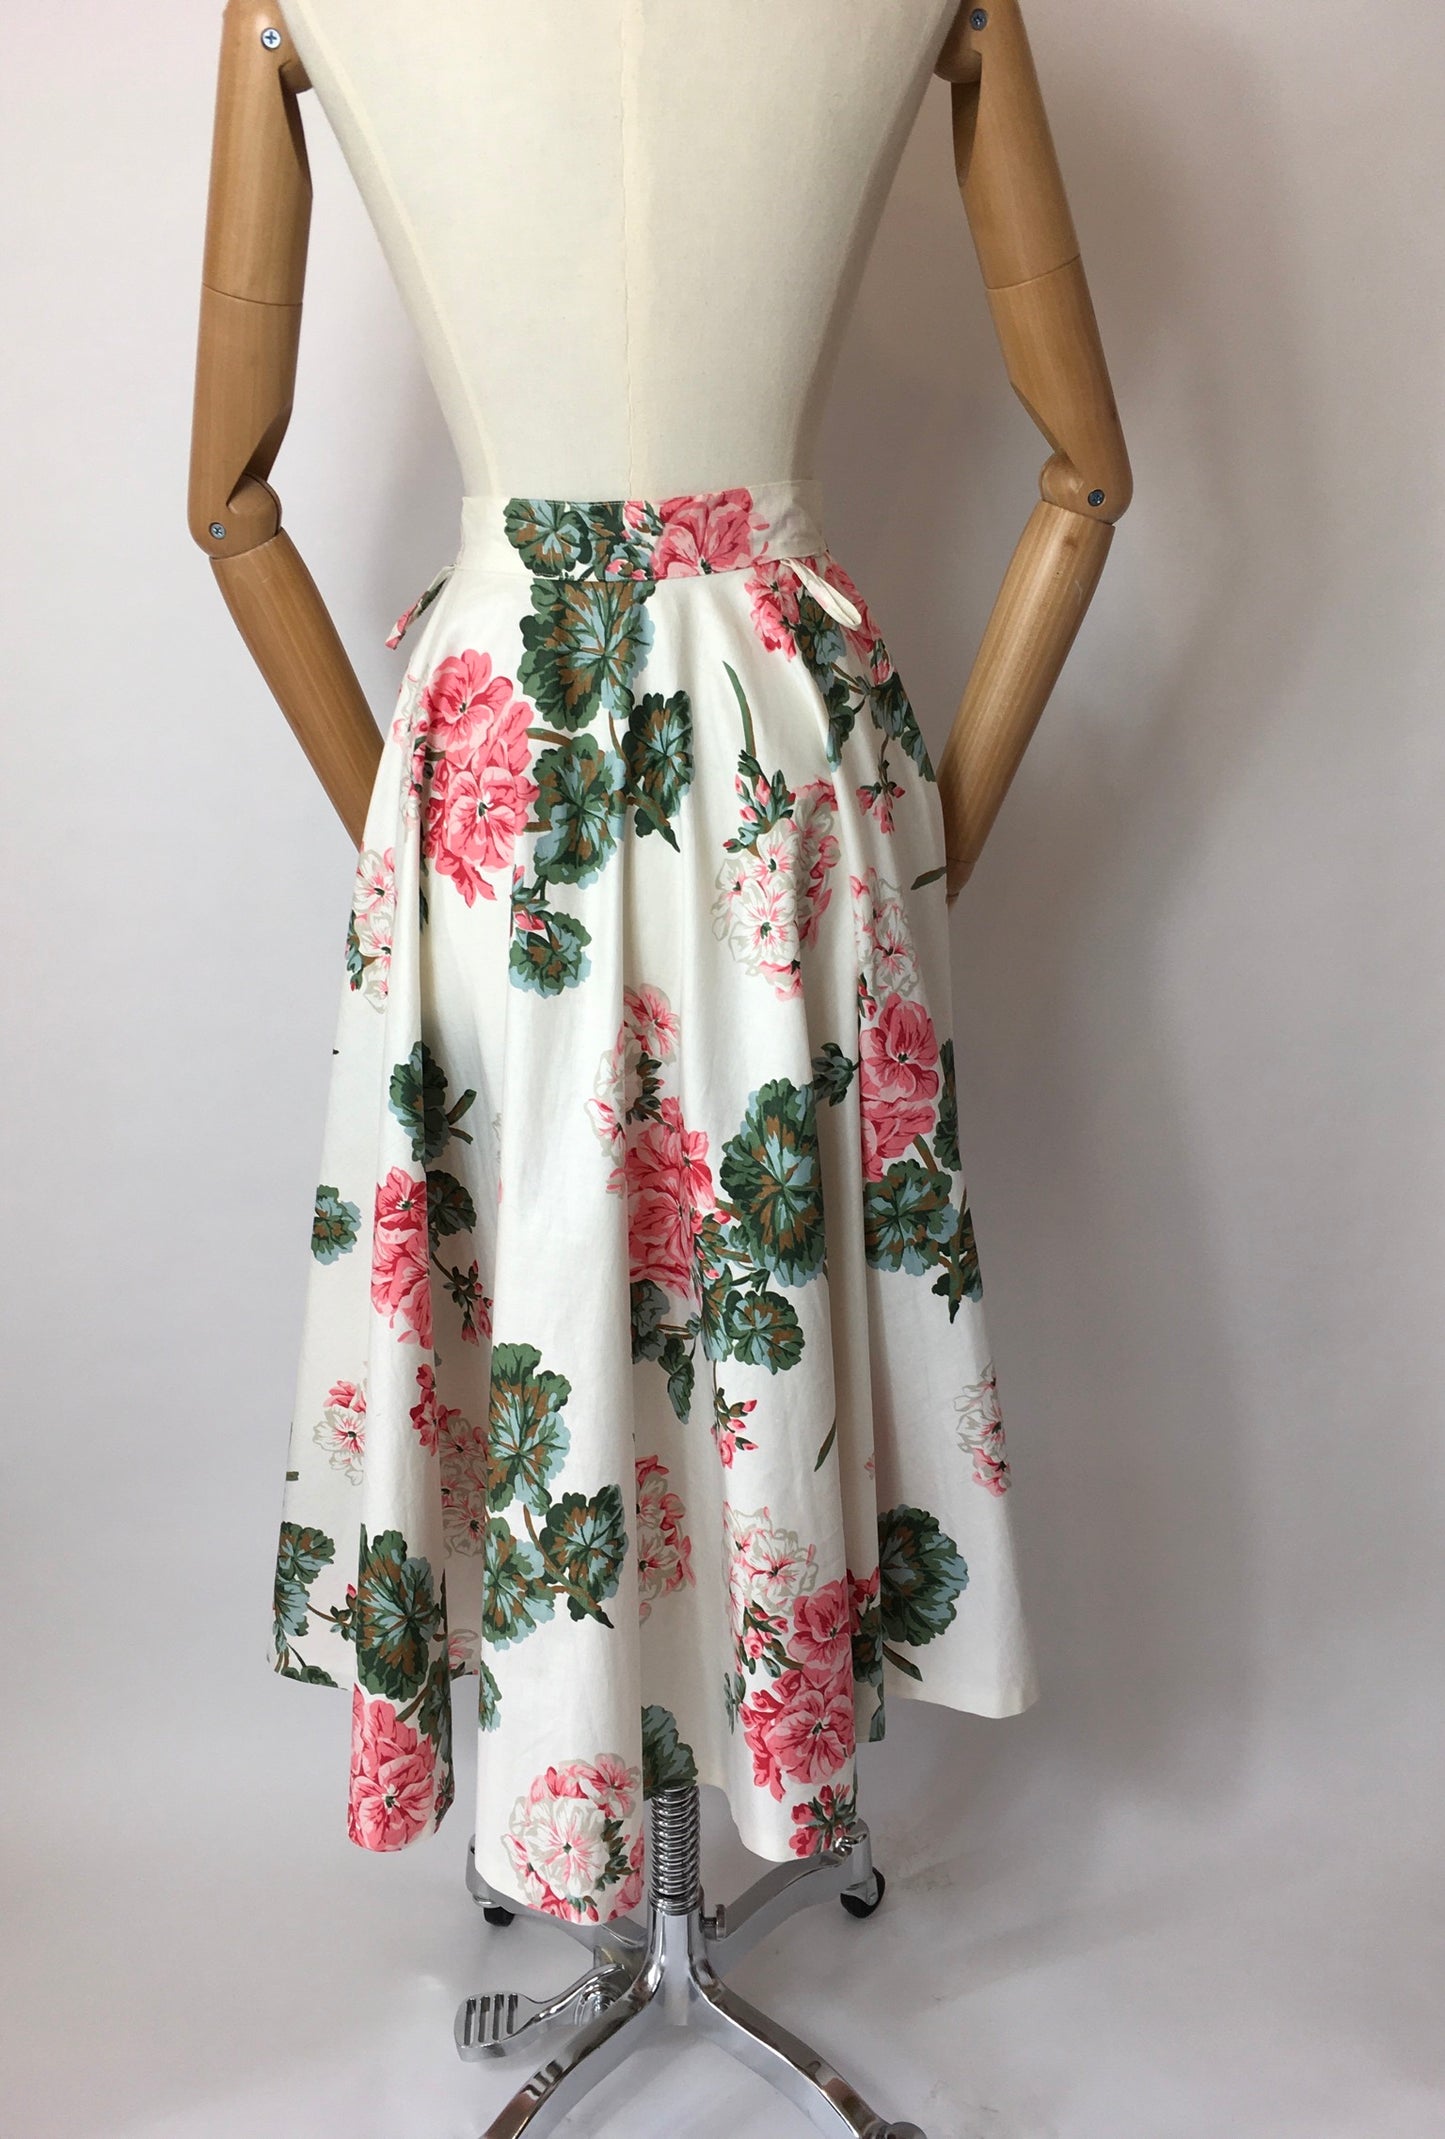 Original 1950s Darling Floral Cotton Sateen Skirt - Lovely Floral in Soft Pinks, rose pinks and warm greens